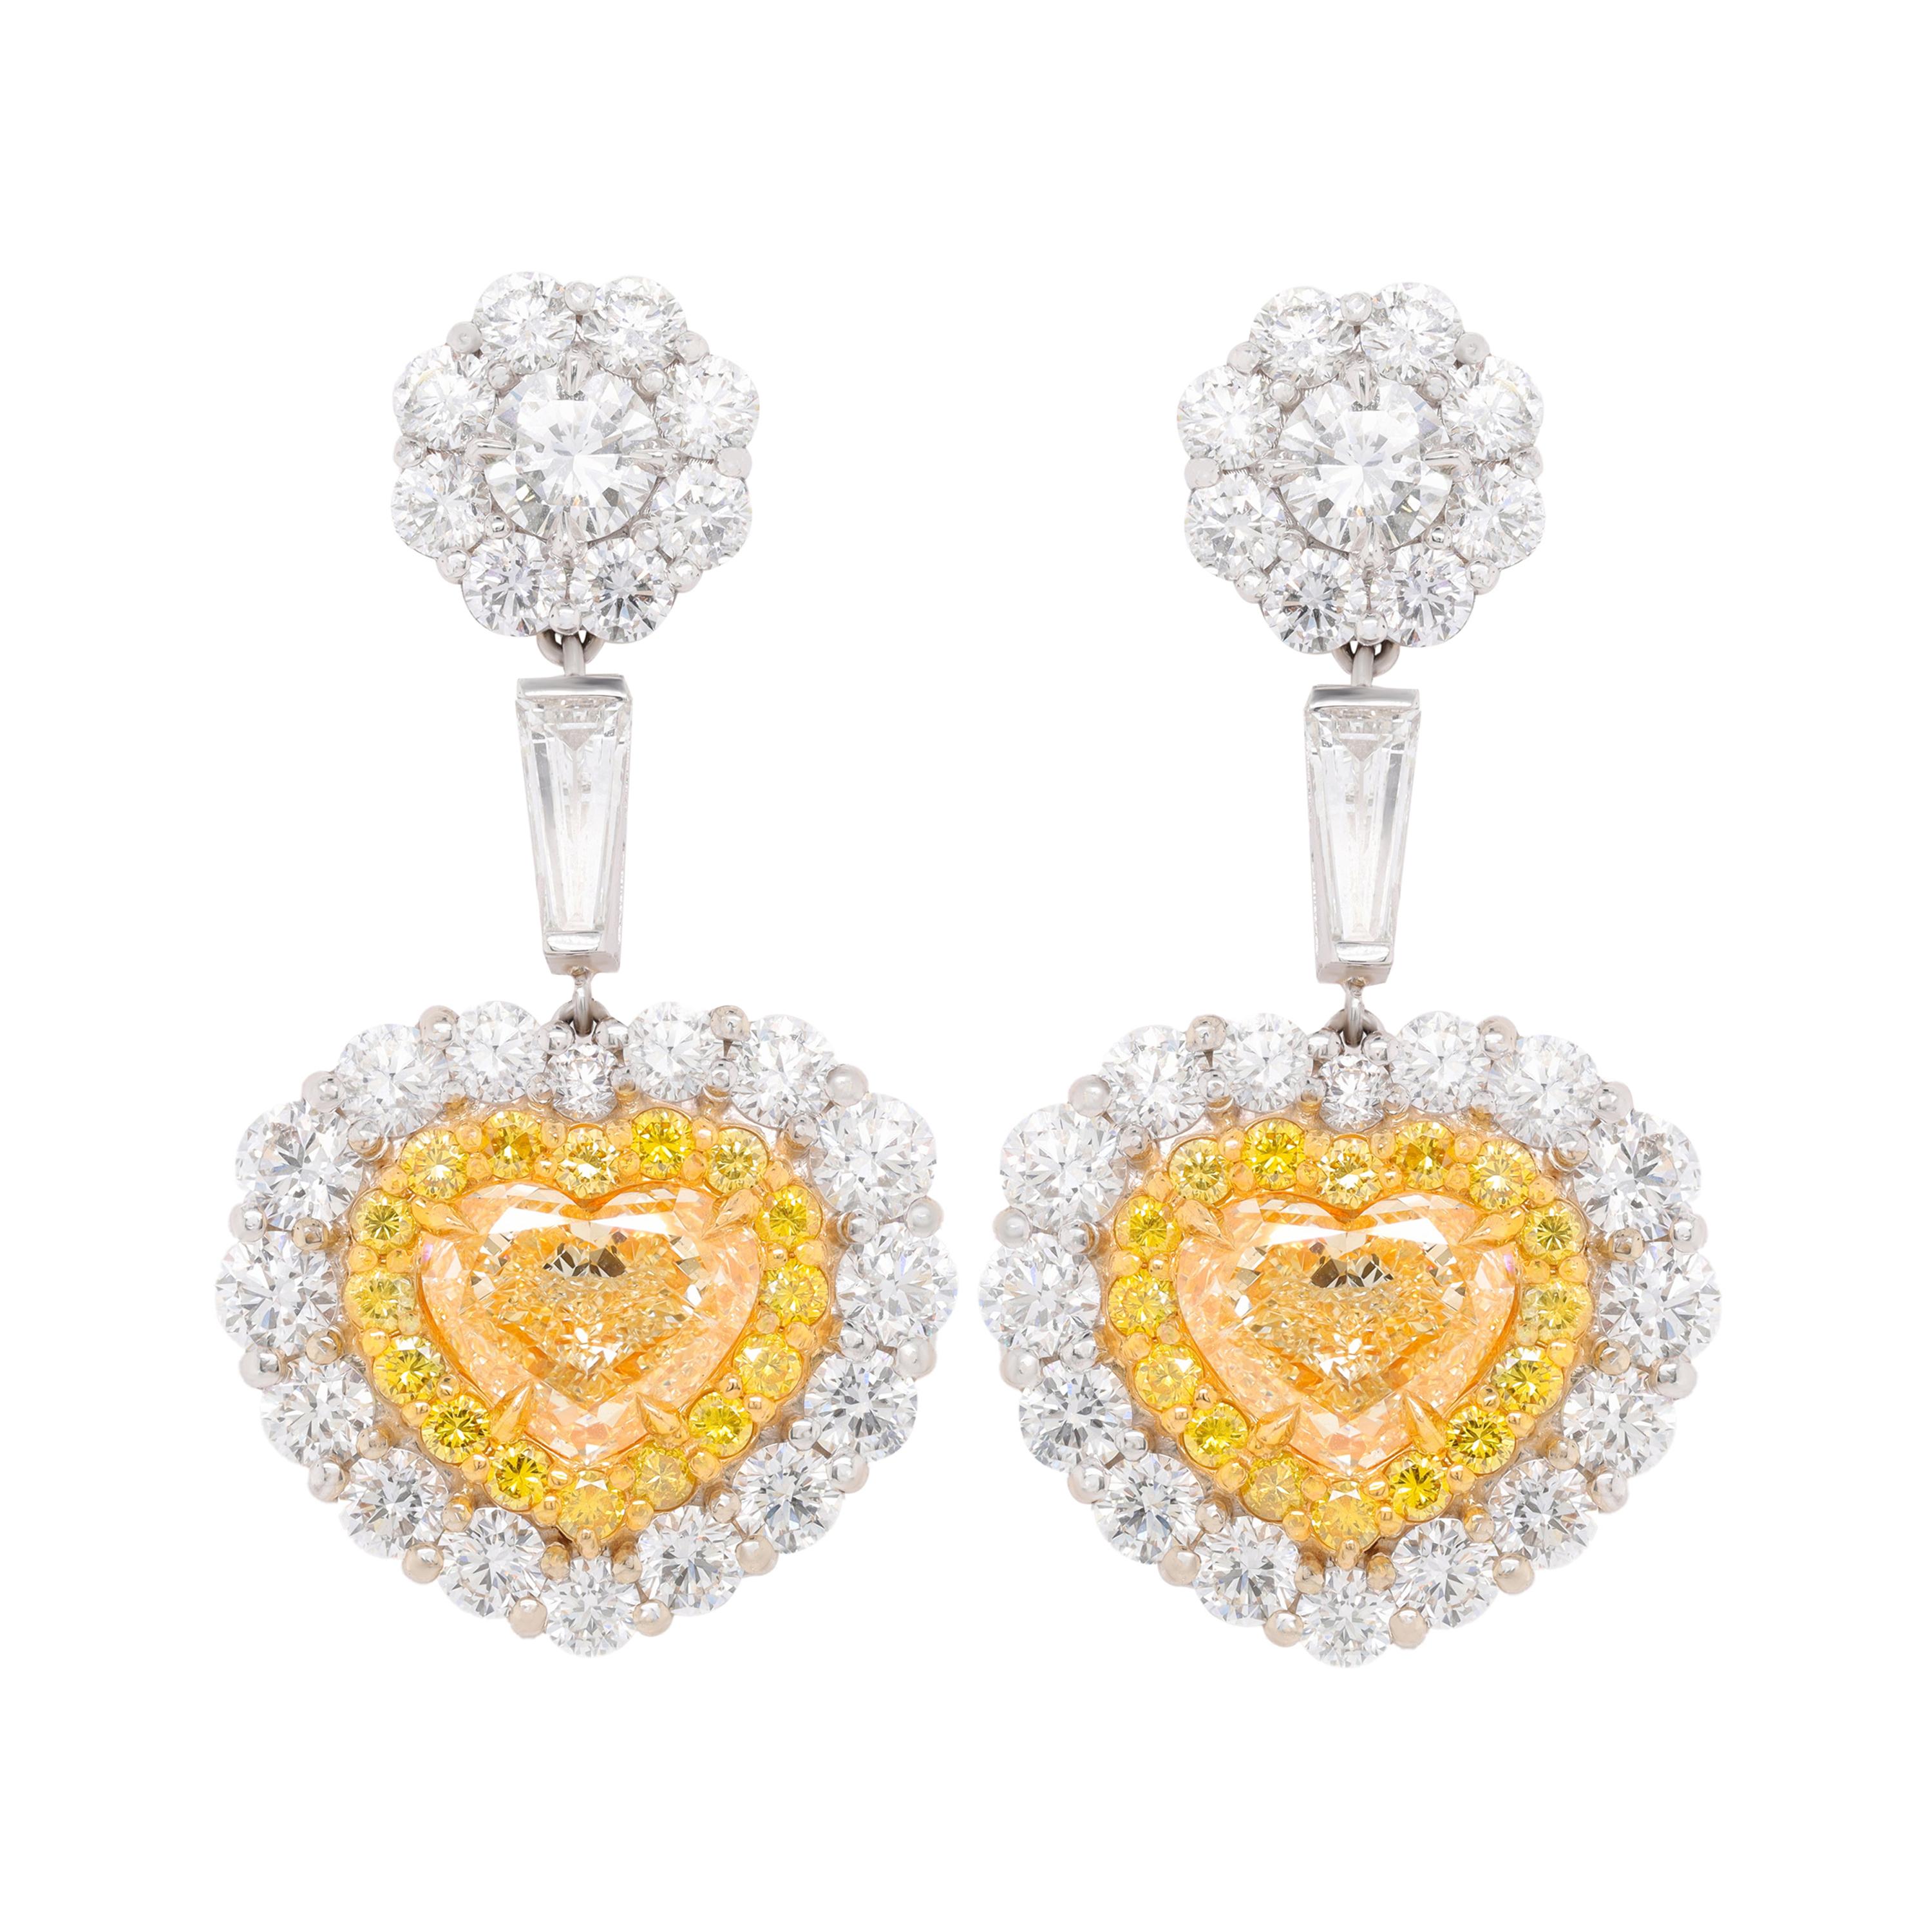 Platinum and 18kt Magnificent Earrings with Fancy Yellow Diamonds